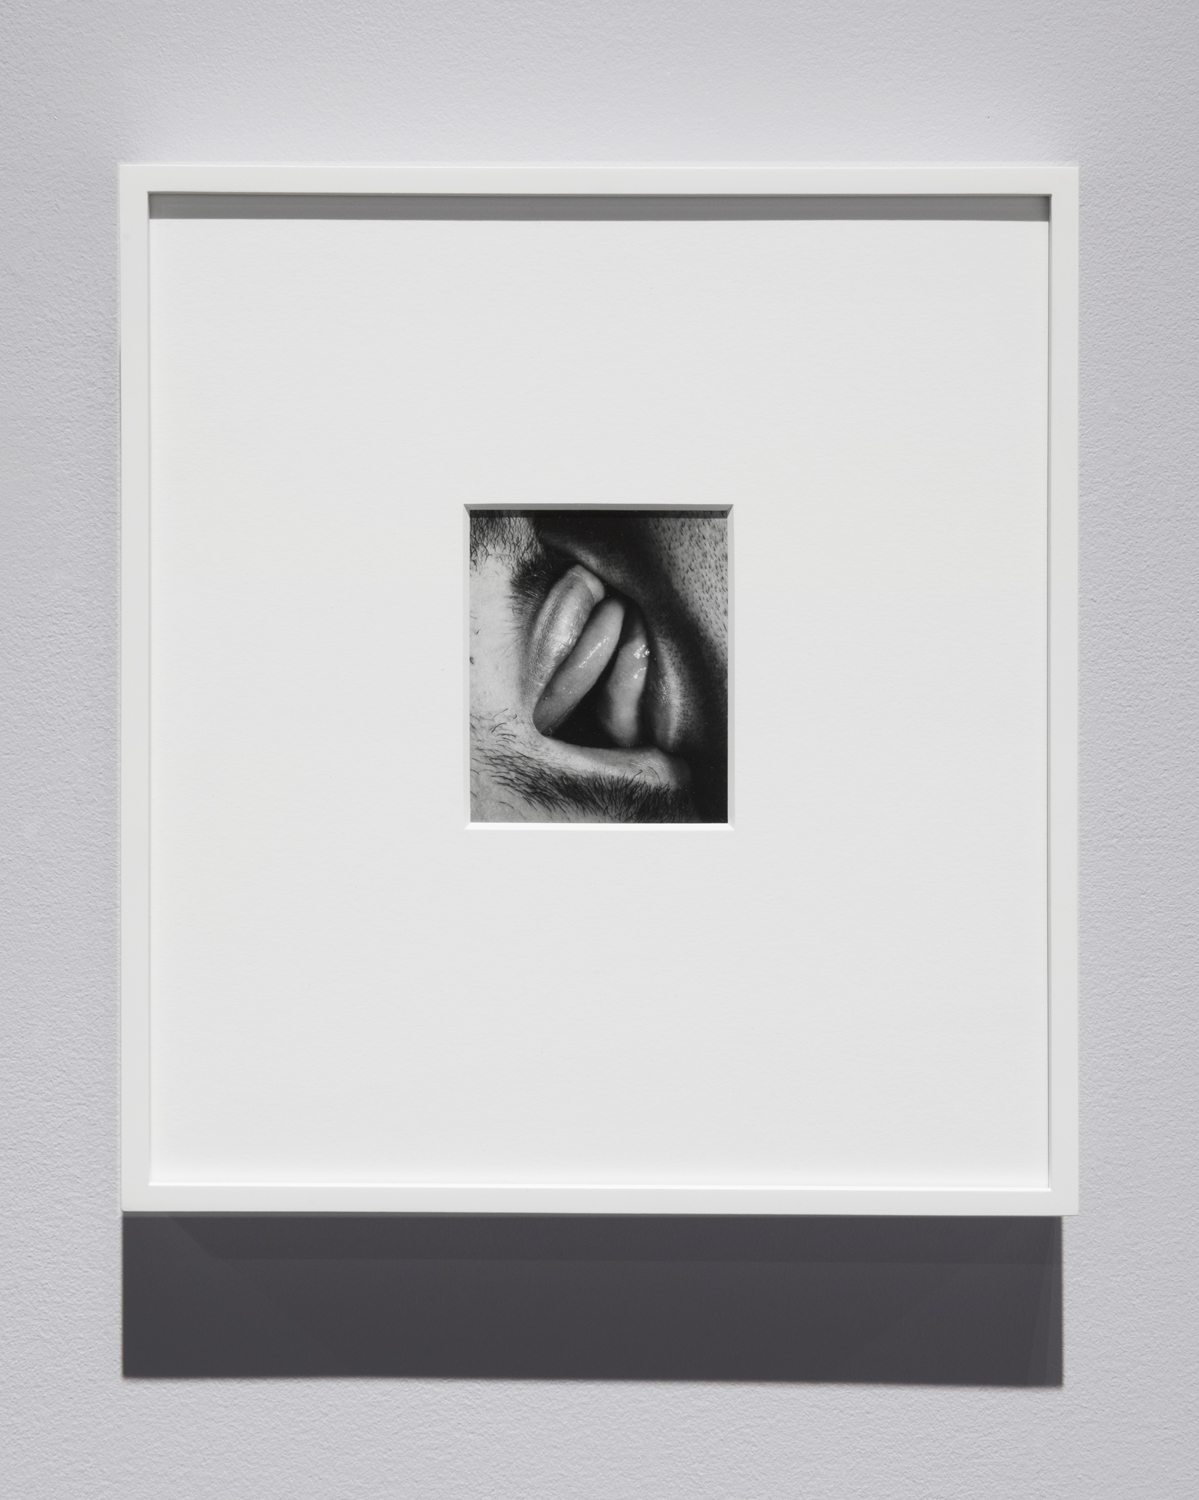   Kiss Portfolio &nbsp;(2016) gelatin silver print, 4” x 5”, from a portfolio of 8 images  Installation view of  Unruly Matter  at Daniel Faria Gallery, Toronto, Canada 